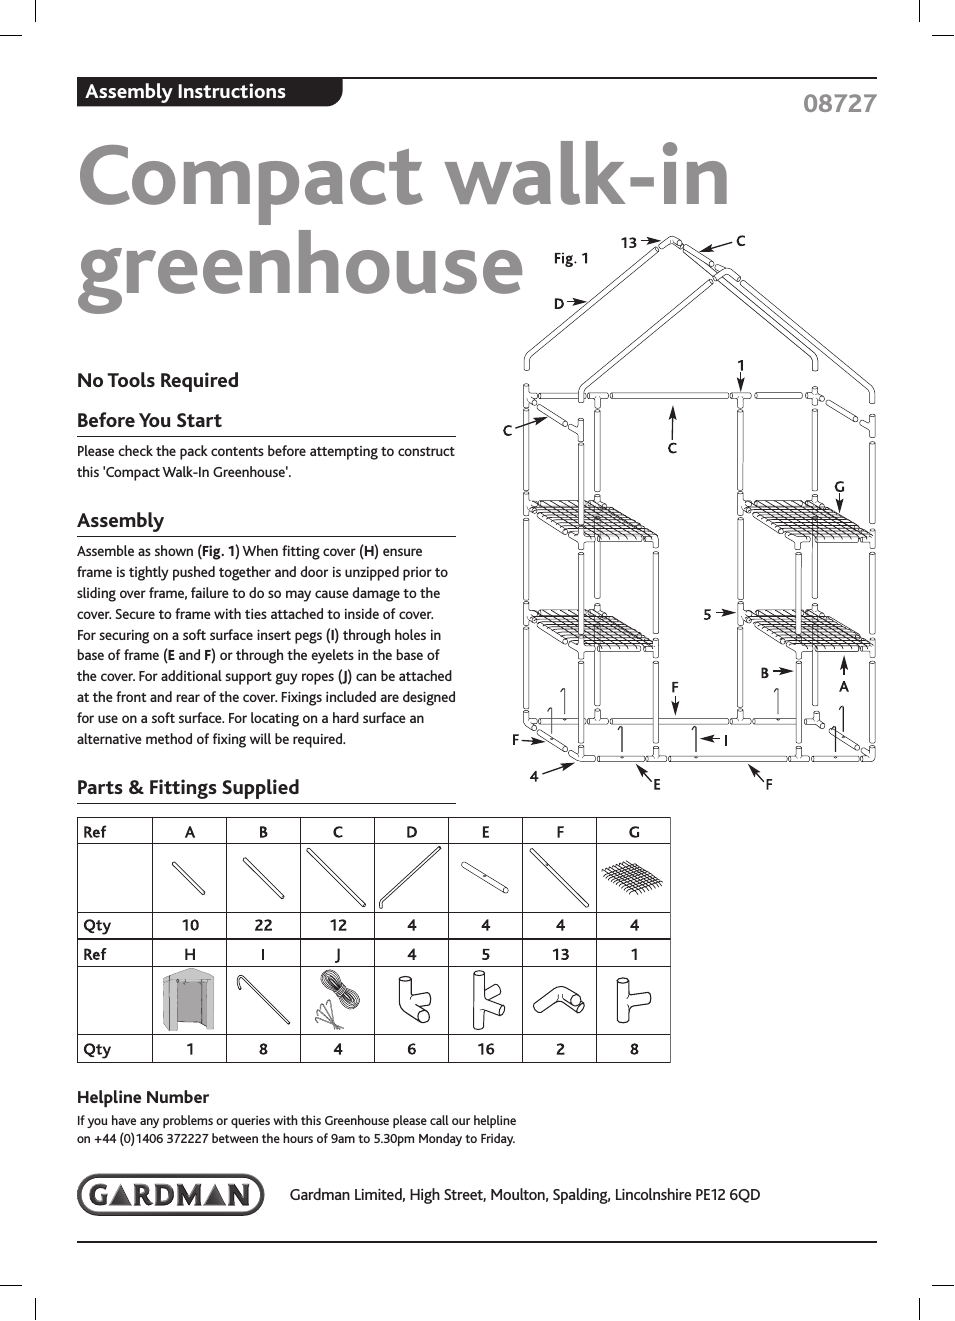 Compact walk-in greenhouse